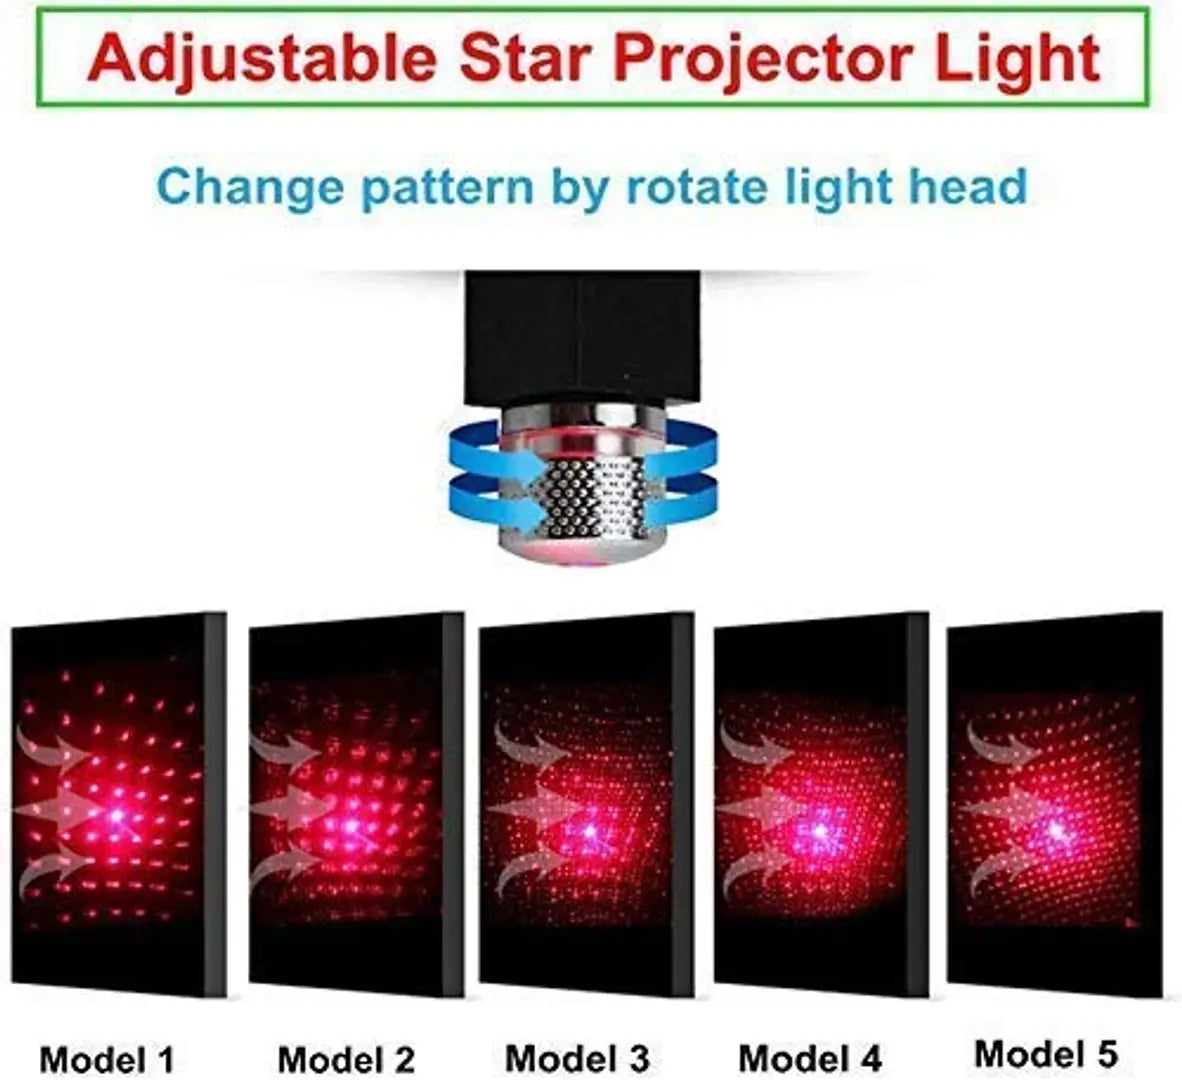 USB Roof Star Projector Lights with 3 modes, USB Portable Adjustable Flexible Interior Car Night Lamp Decor with Romantic Galaxy Atmosphere fit Car, Ceiling, Bedroom, Party (PlugPlay, Purple))